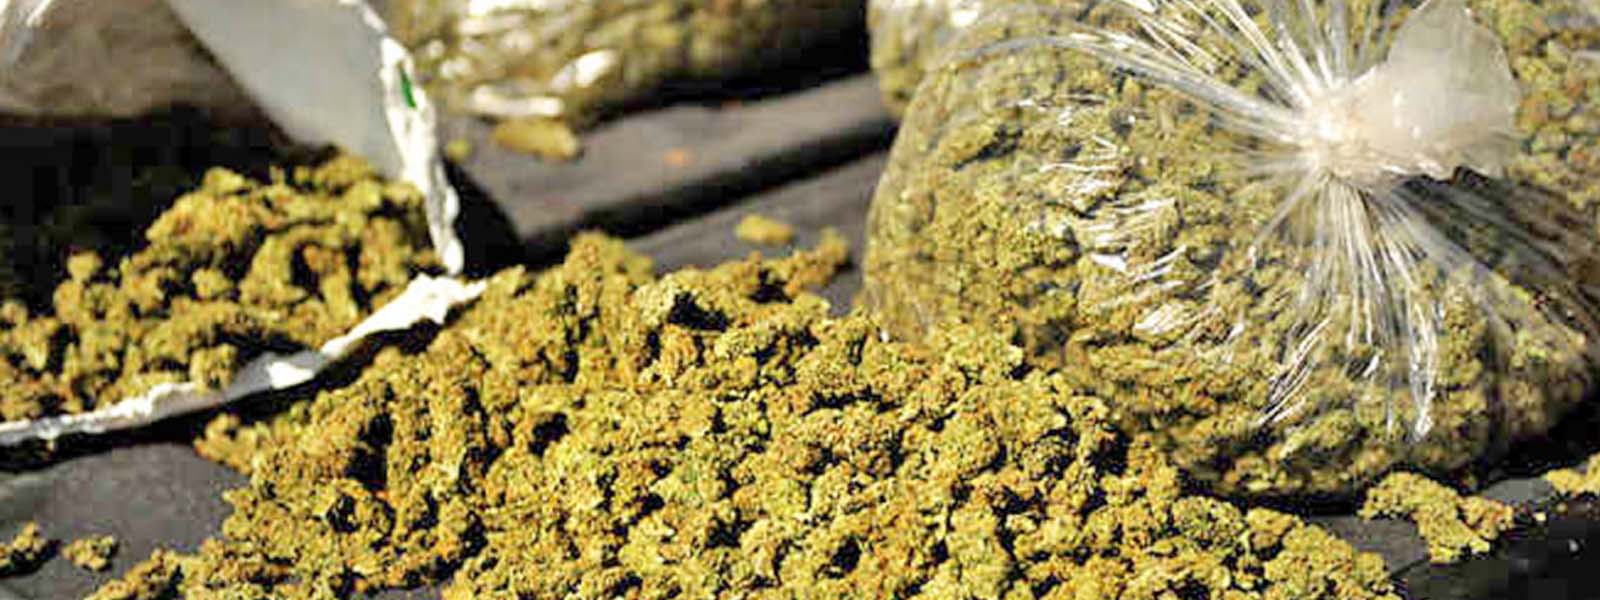 Over 60 Kg of Kerala Cannabis seized in Jaffna